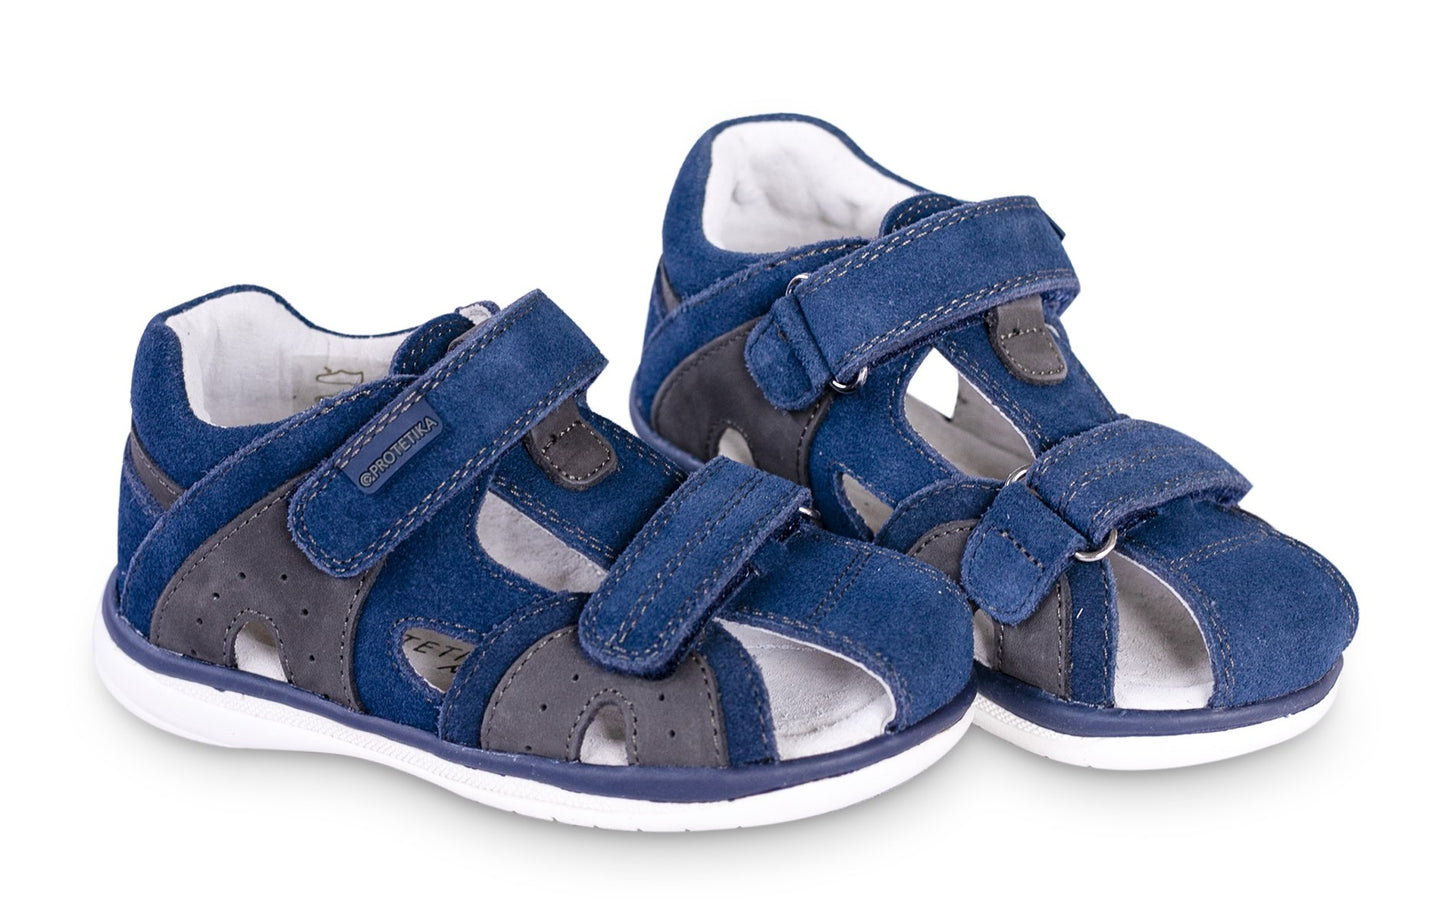 LANDON toddler boy arch support sandals - feelgoodshoes.ae